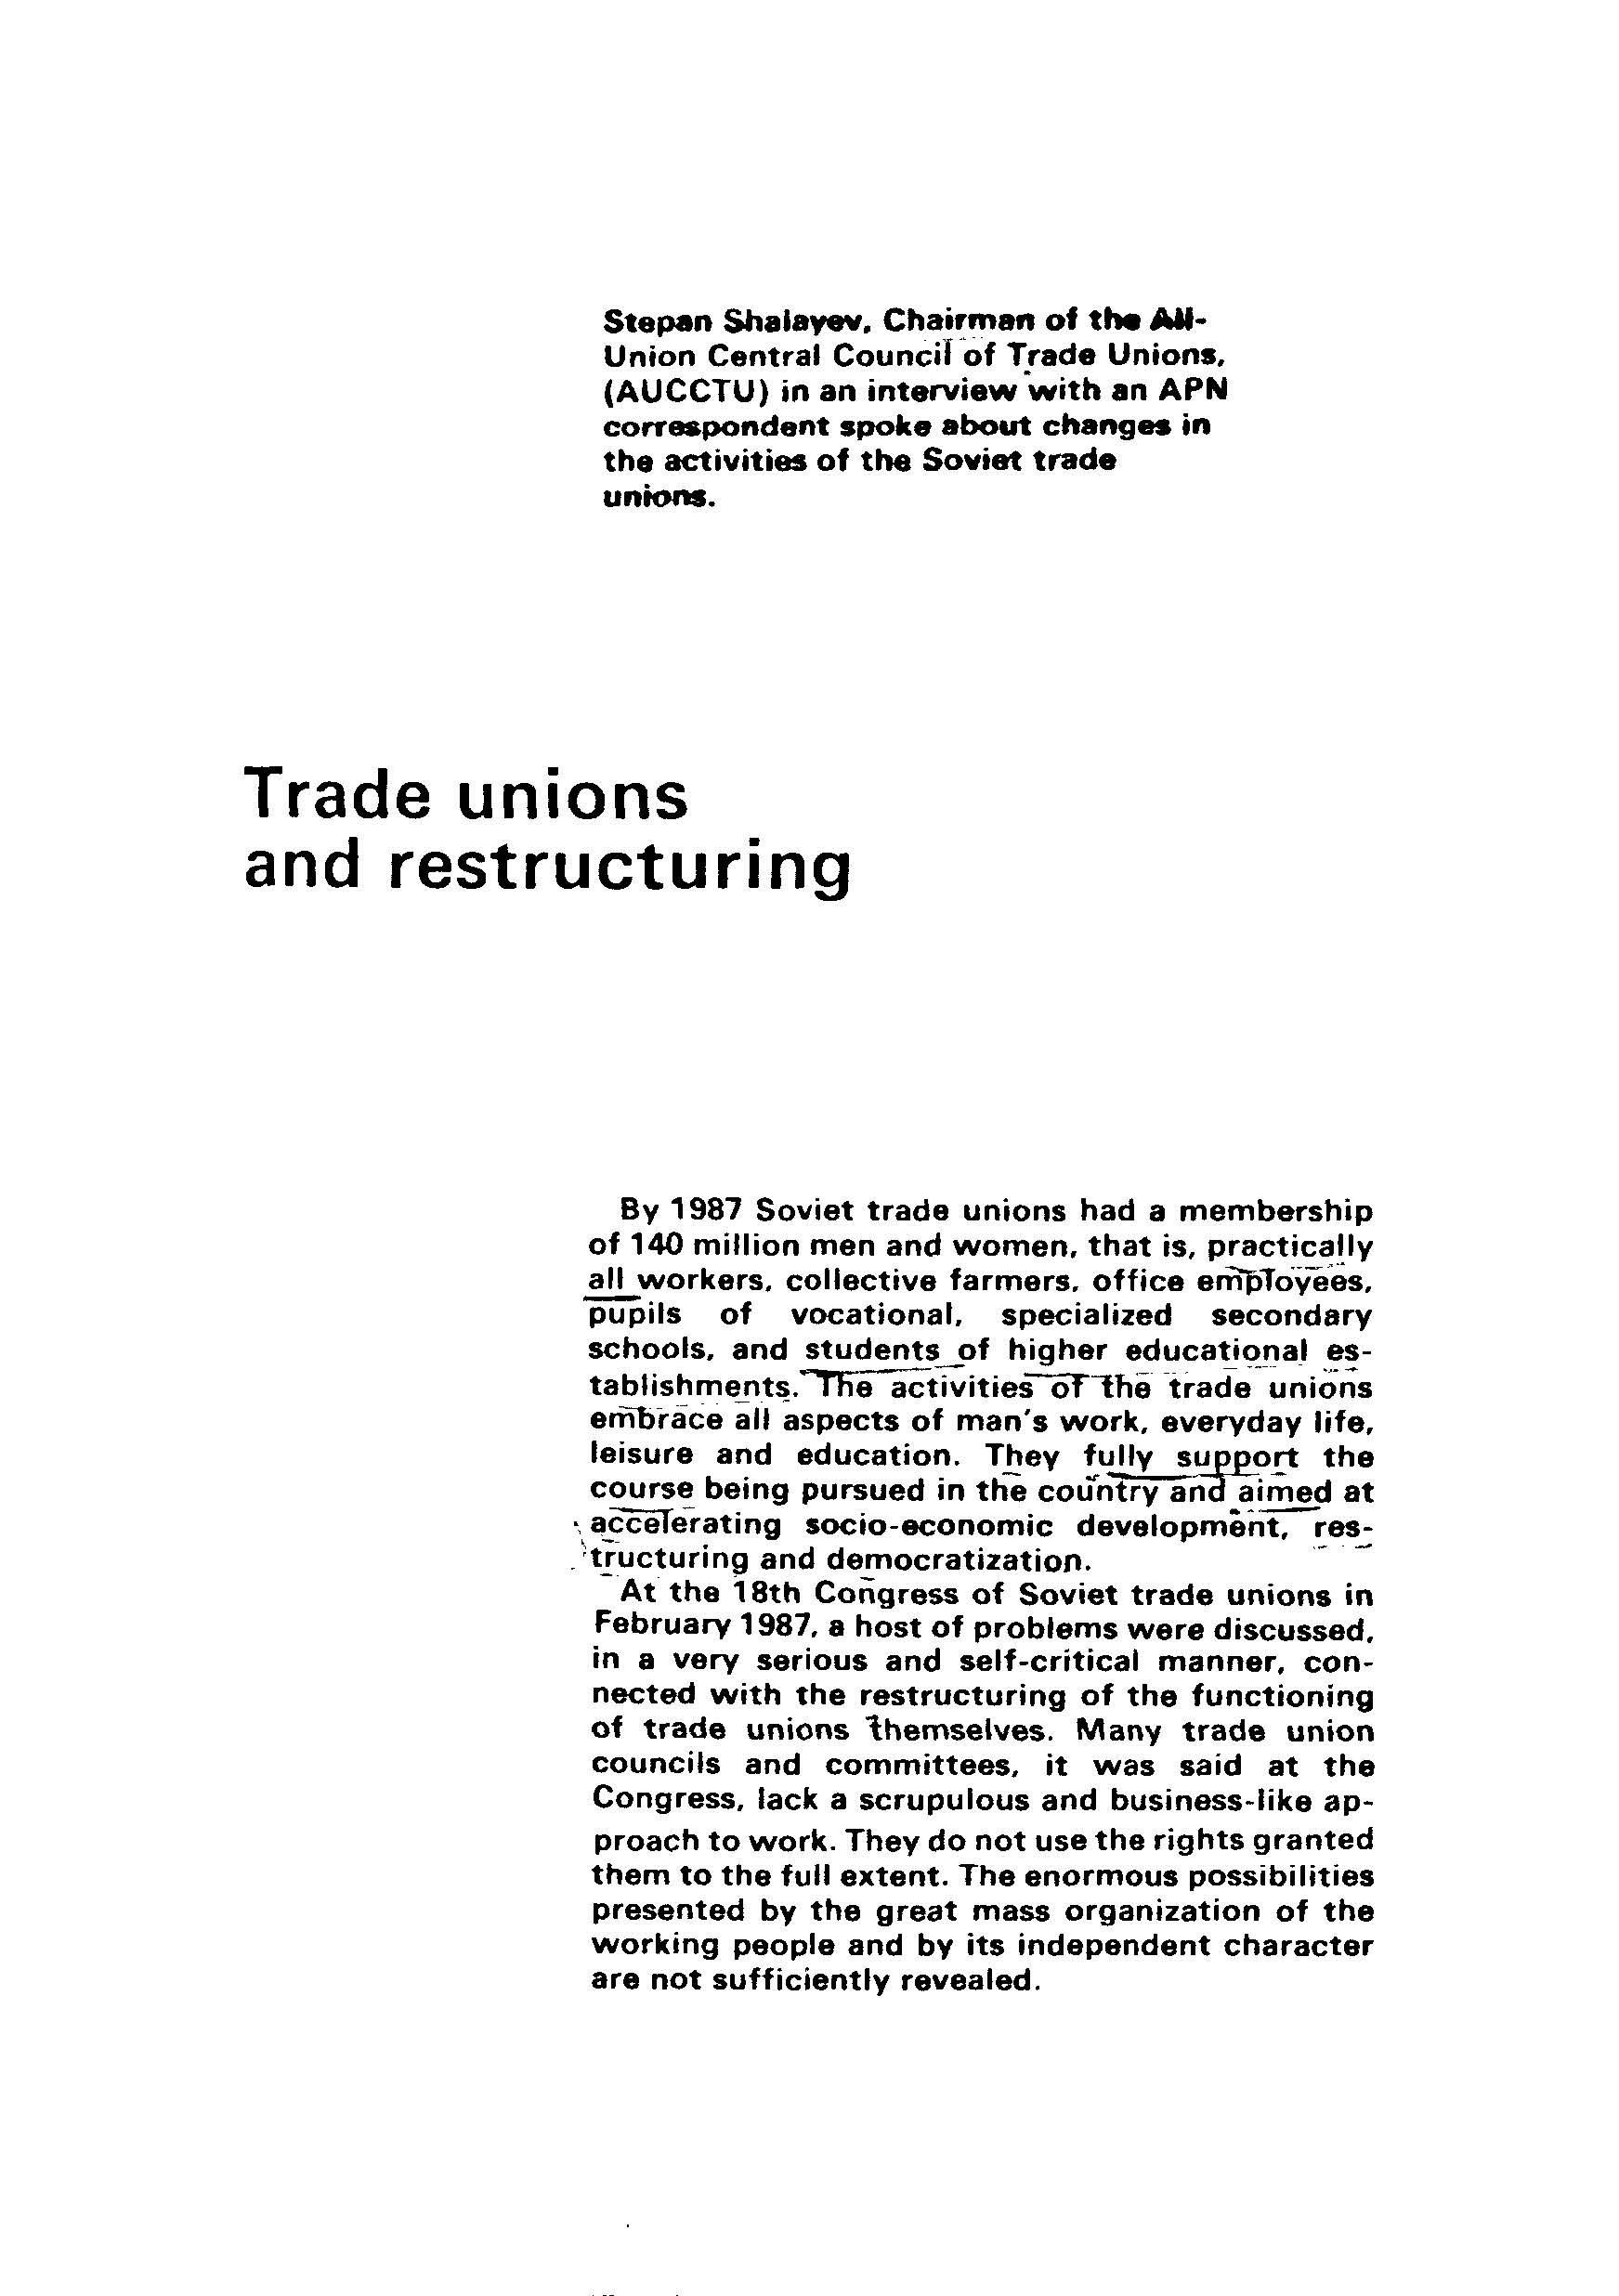 Trade unions and restructuring